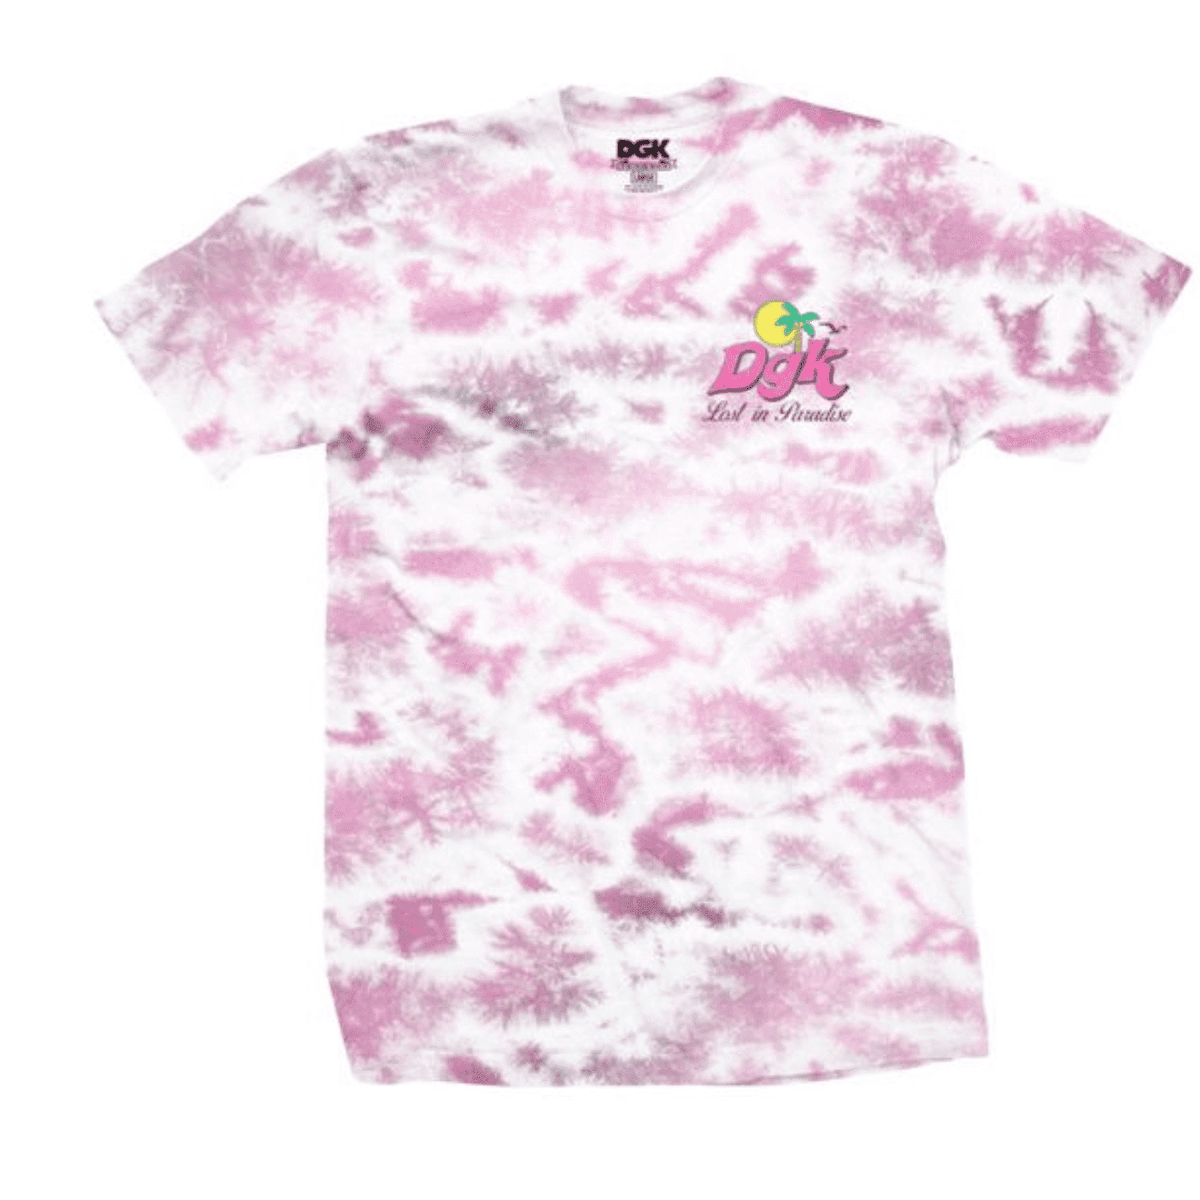 DGK Lost in Paradise T Shirt Pink